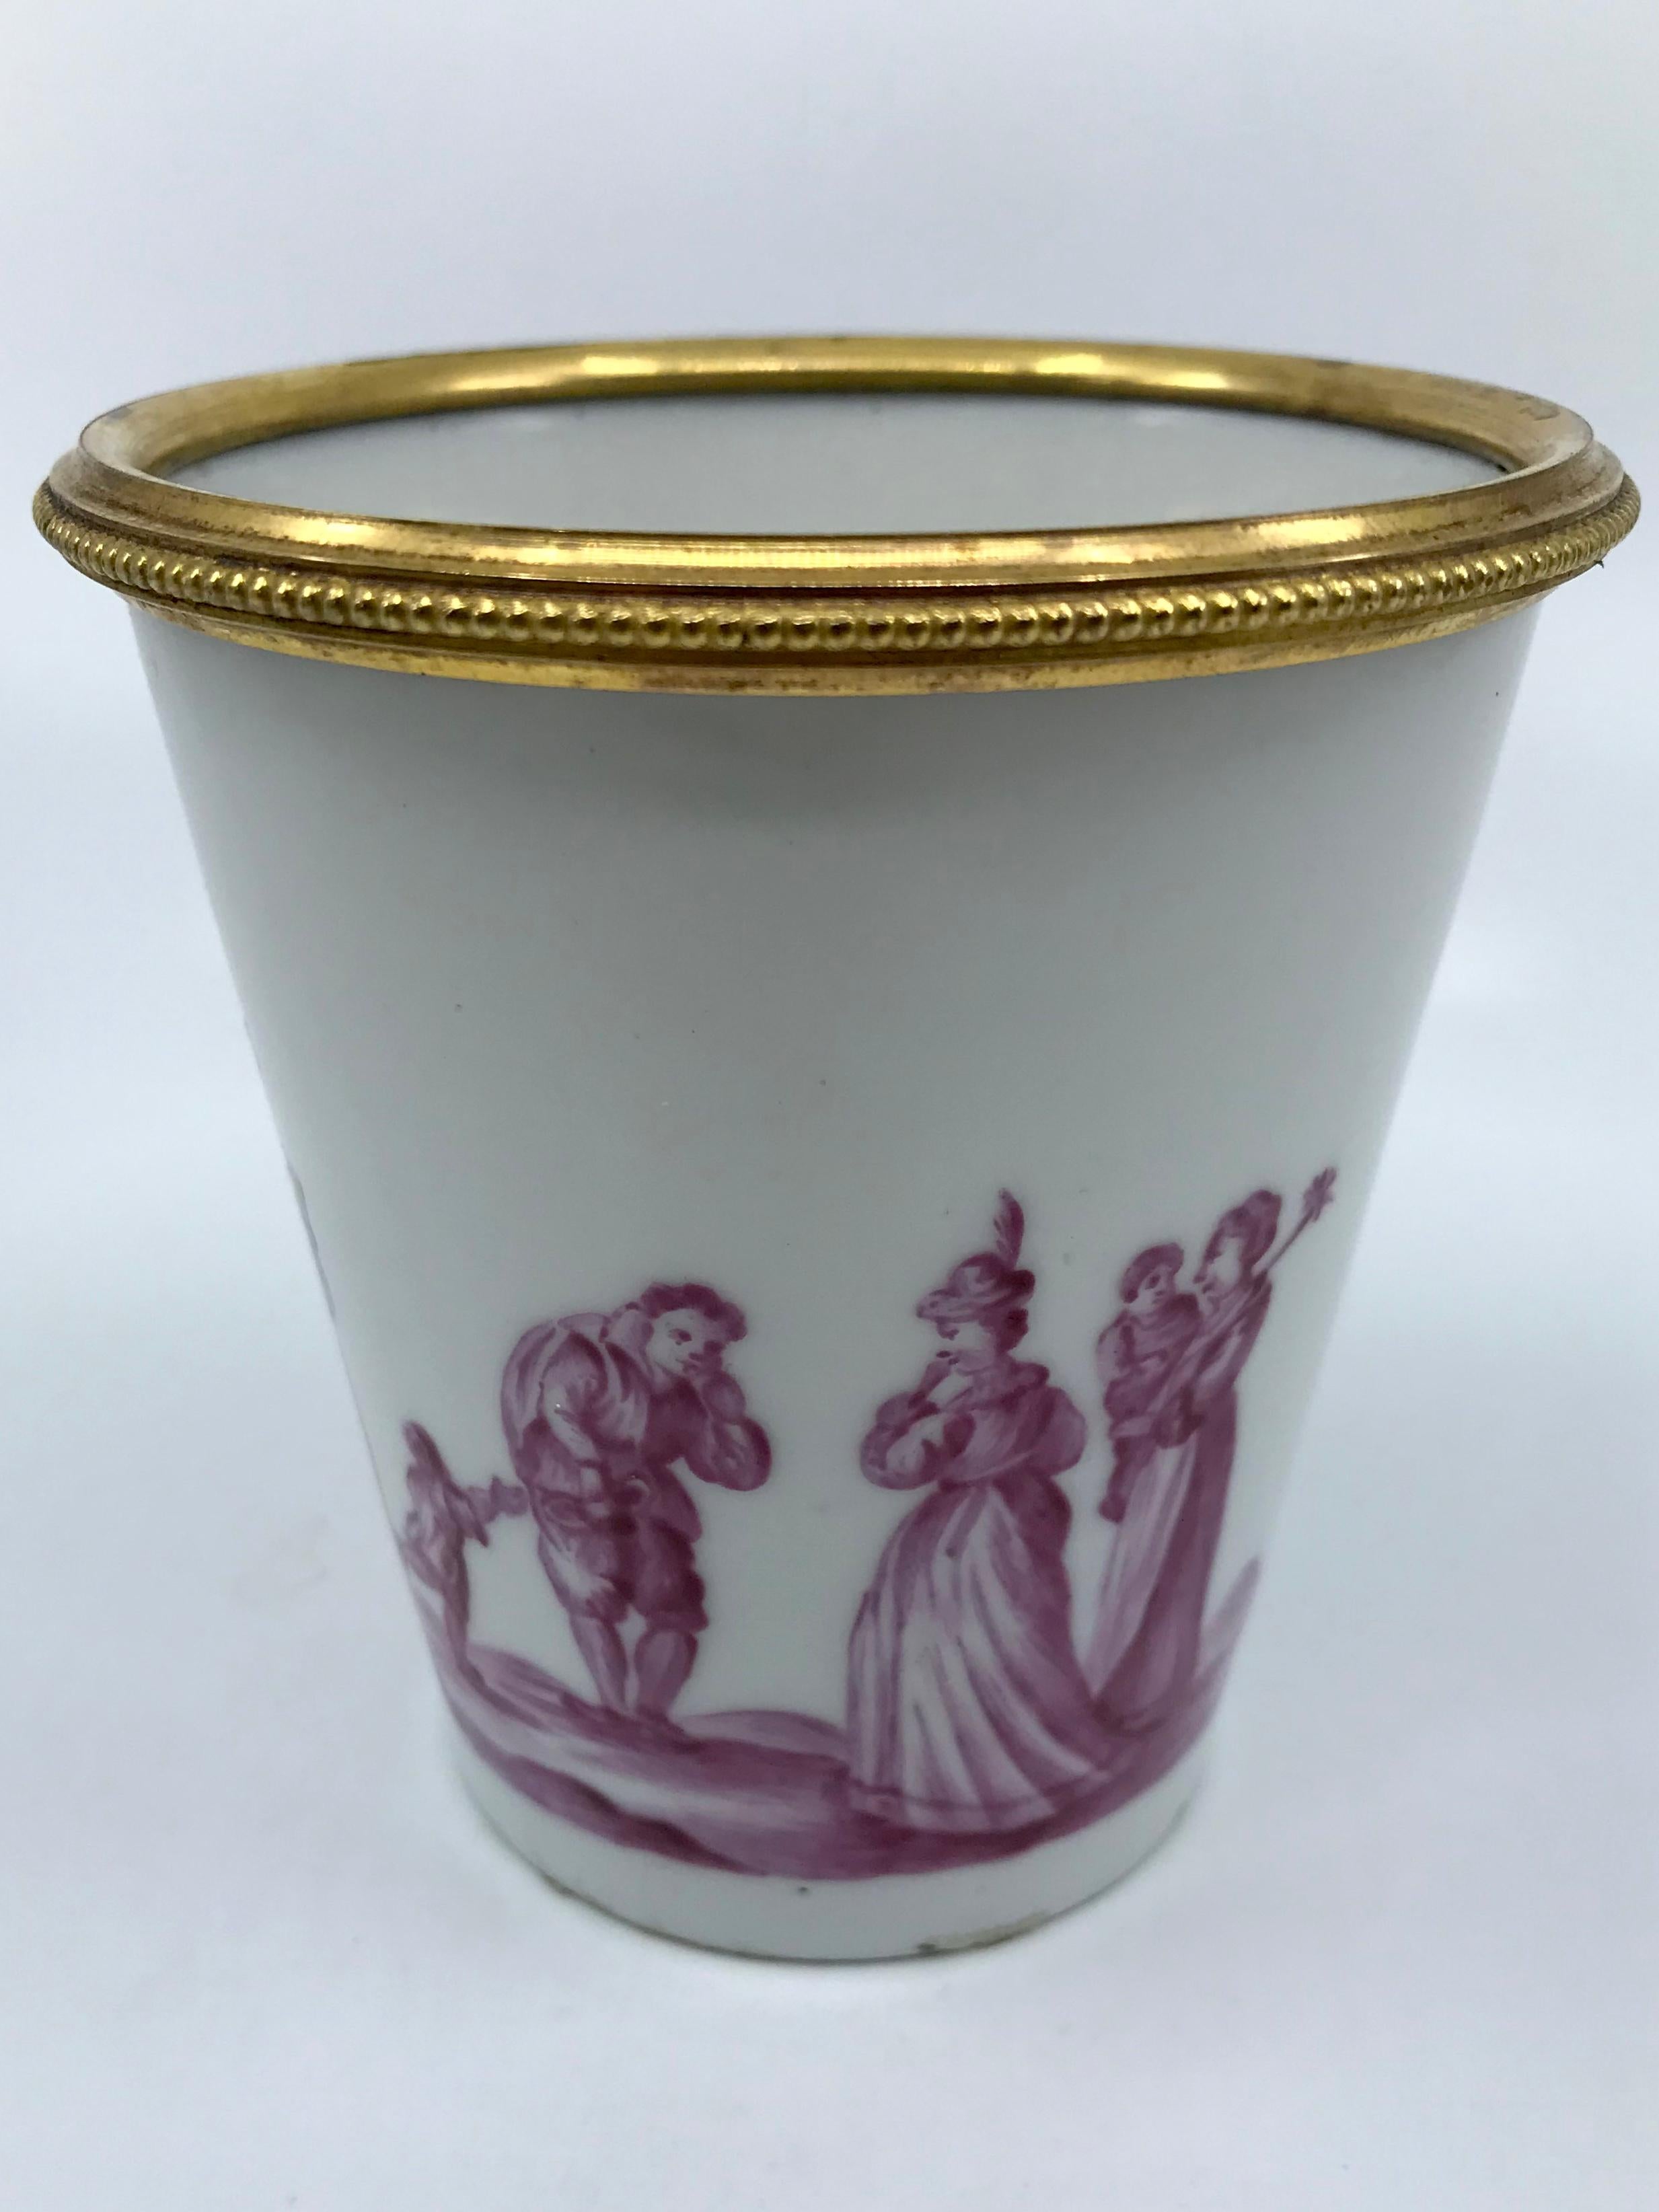 French white and magenta porcelain bud vase. White porcelain vase/pen cup with ormolu beaded rim formerly used as a quill cup with continuous band puce figures in a landscape with markings for Samson. France mid-19th century
Dimensions: 3.88”